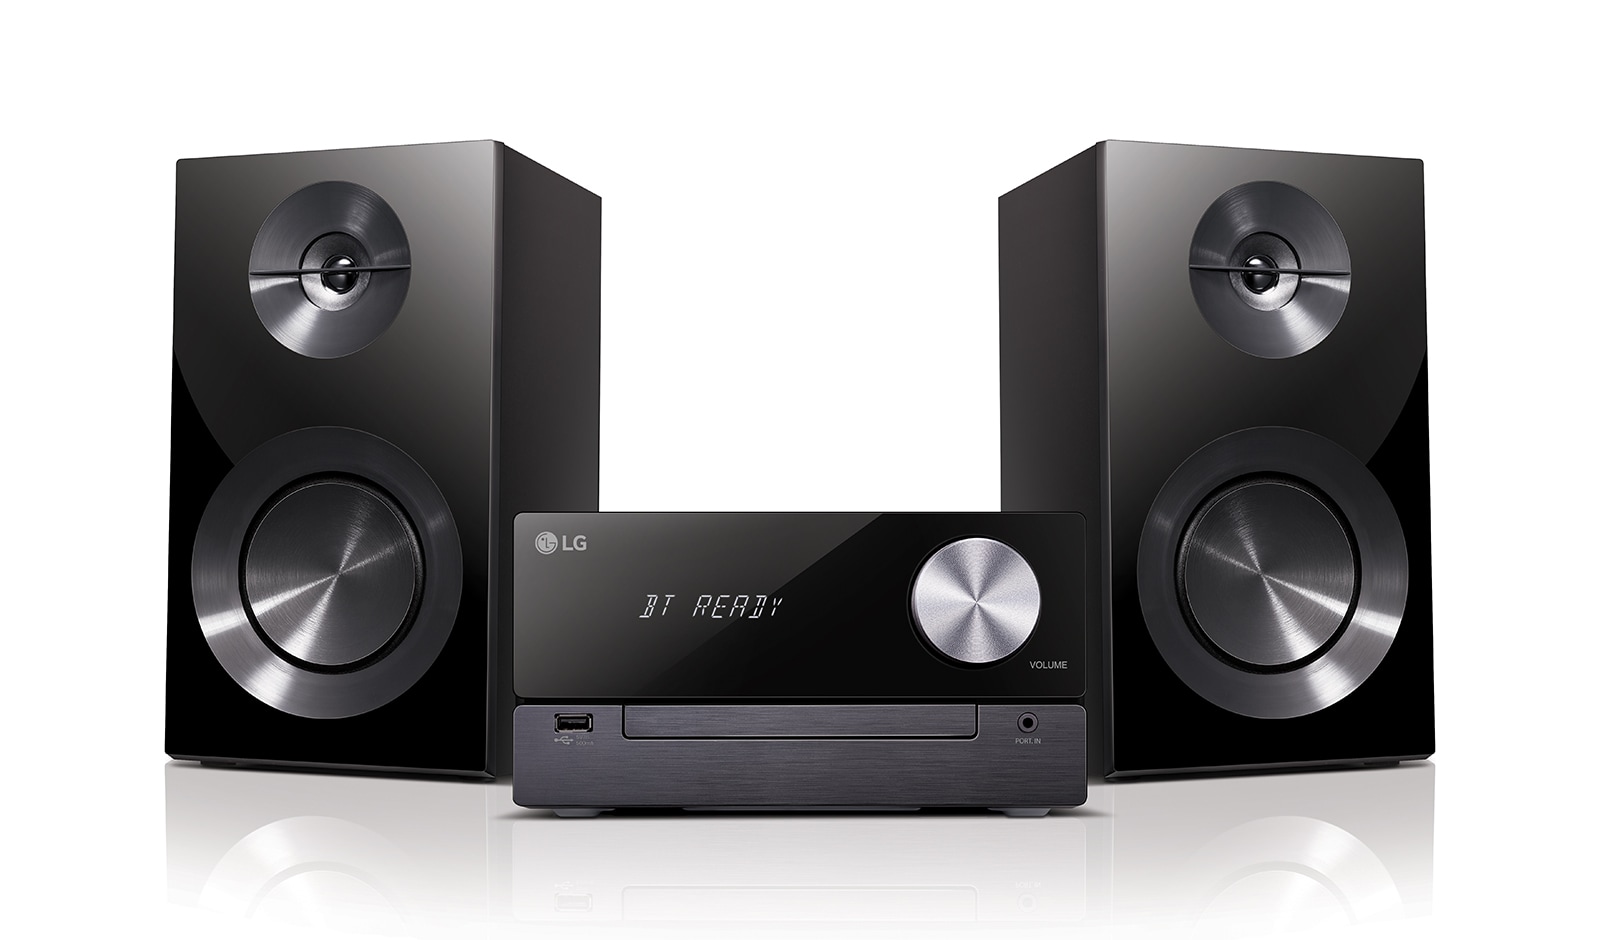 Hi-Fi Audio Micro System with Bluetooth®, DVD Player & TV Tuner